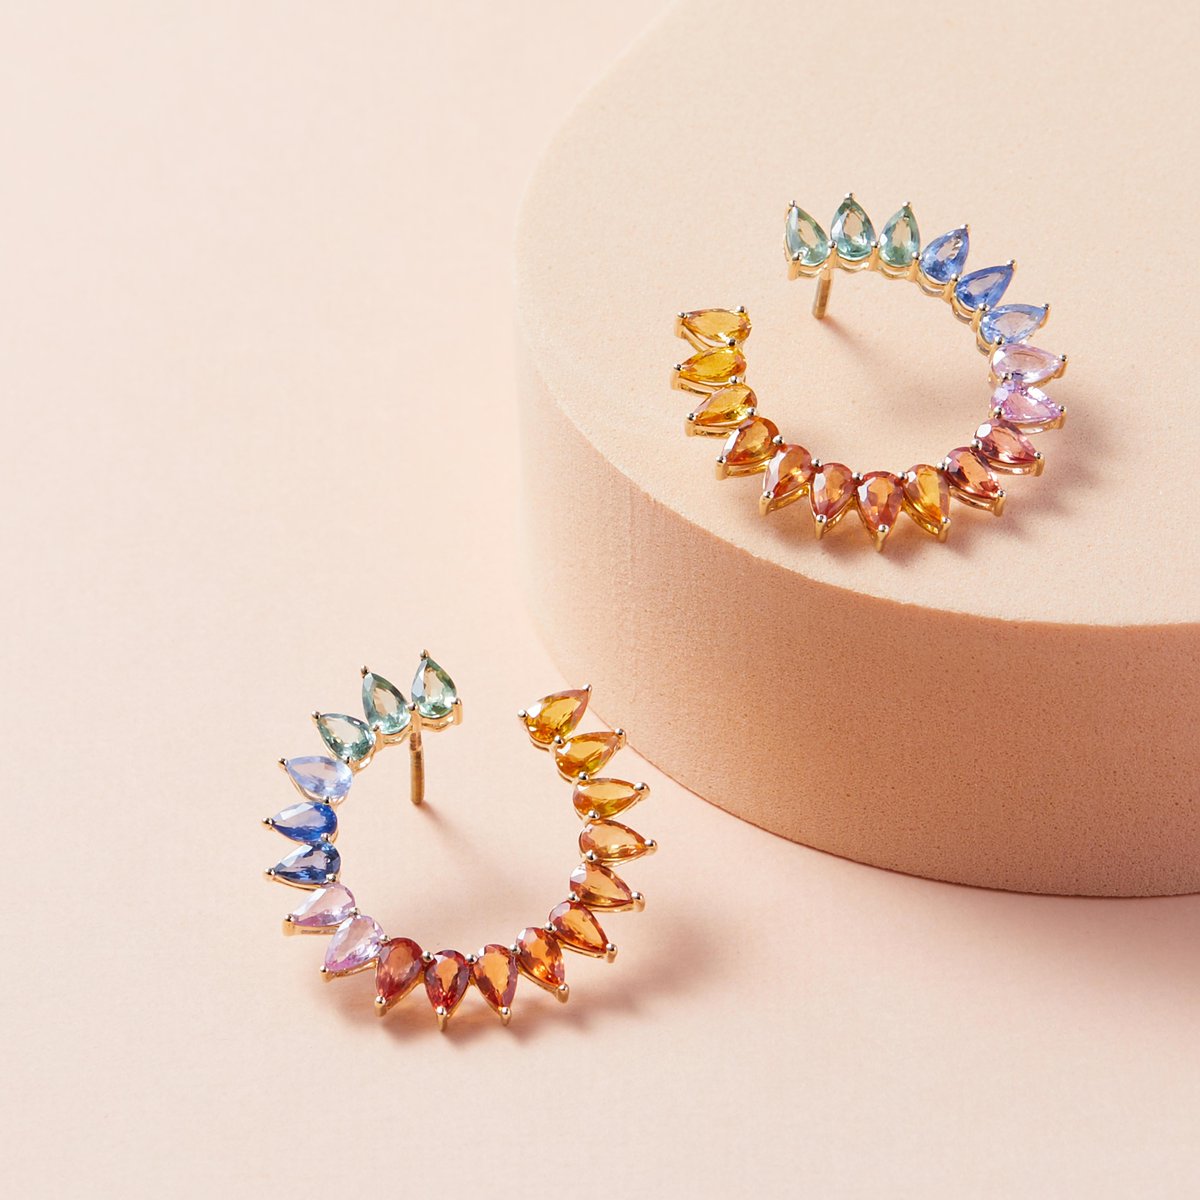 Color accessories are back and bigger than ever! 🌈 Snag these bold hoops from Diamond Insights: bit.ly/3JW1c2X #Jedora #DiamondInsights #ColorfulHoops